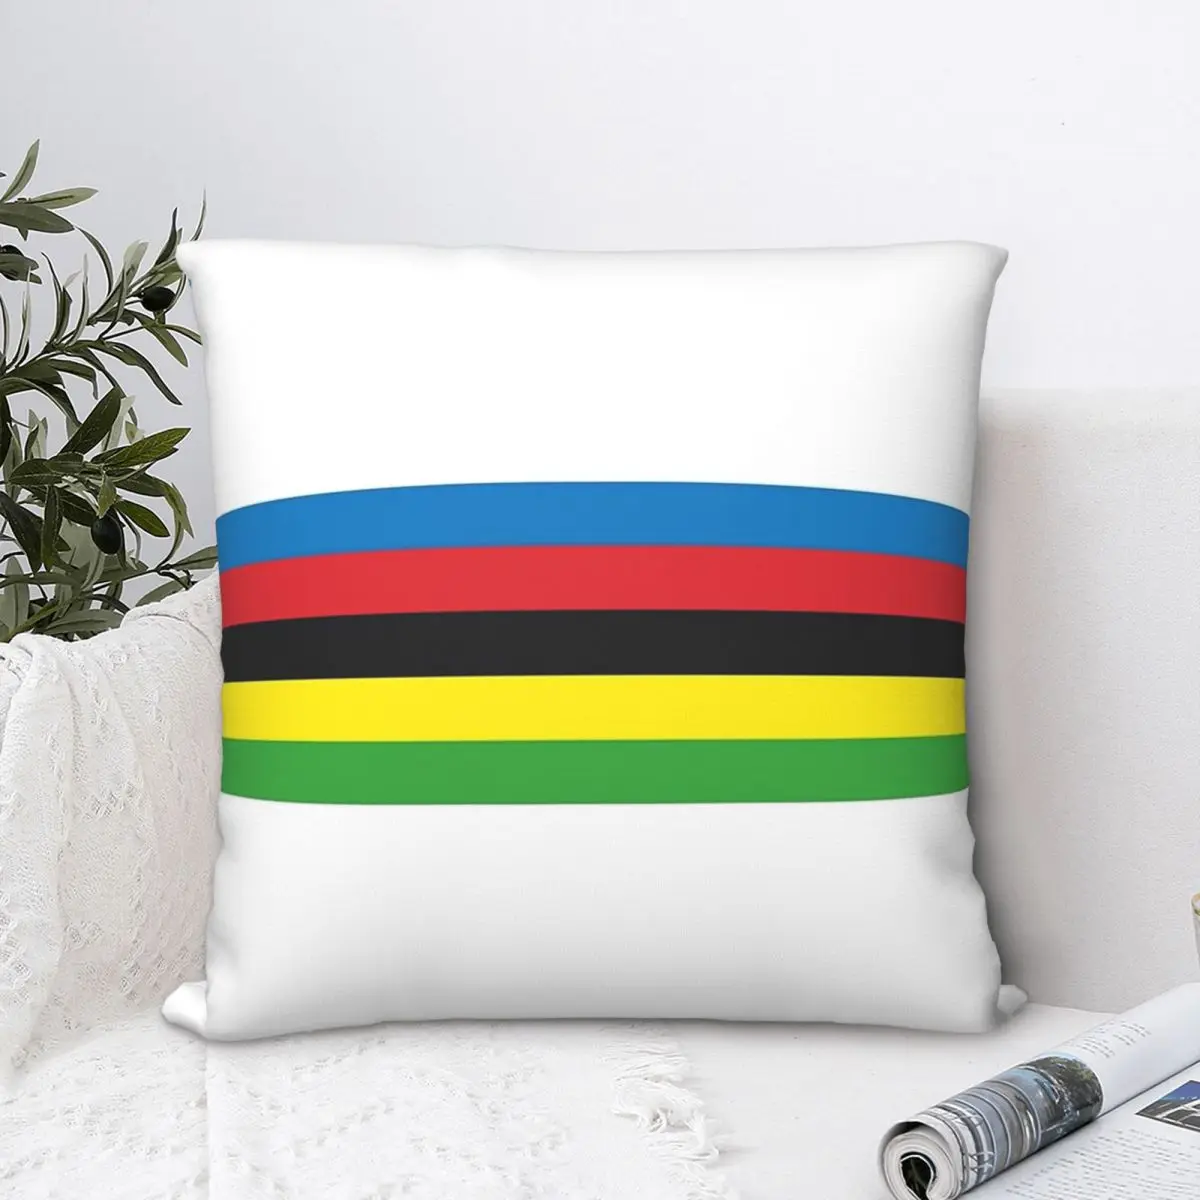 World Champ Throw Pillow Case Bicycle Backpack Cushions Covers DIY Printed Breathable Sofa Decor